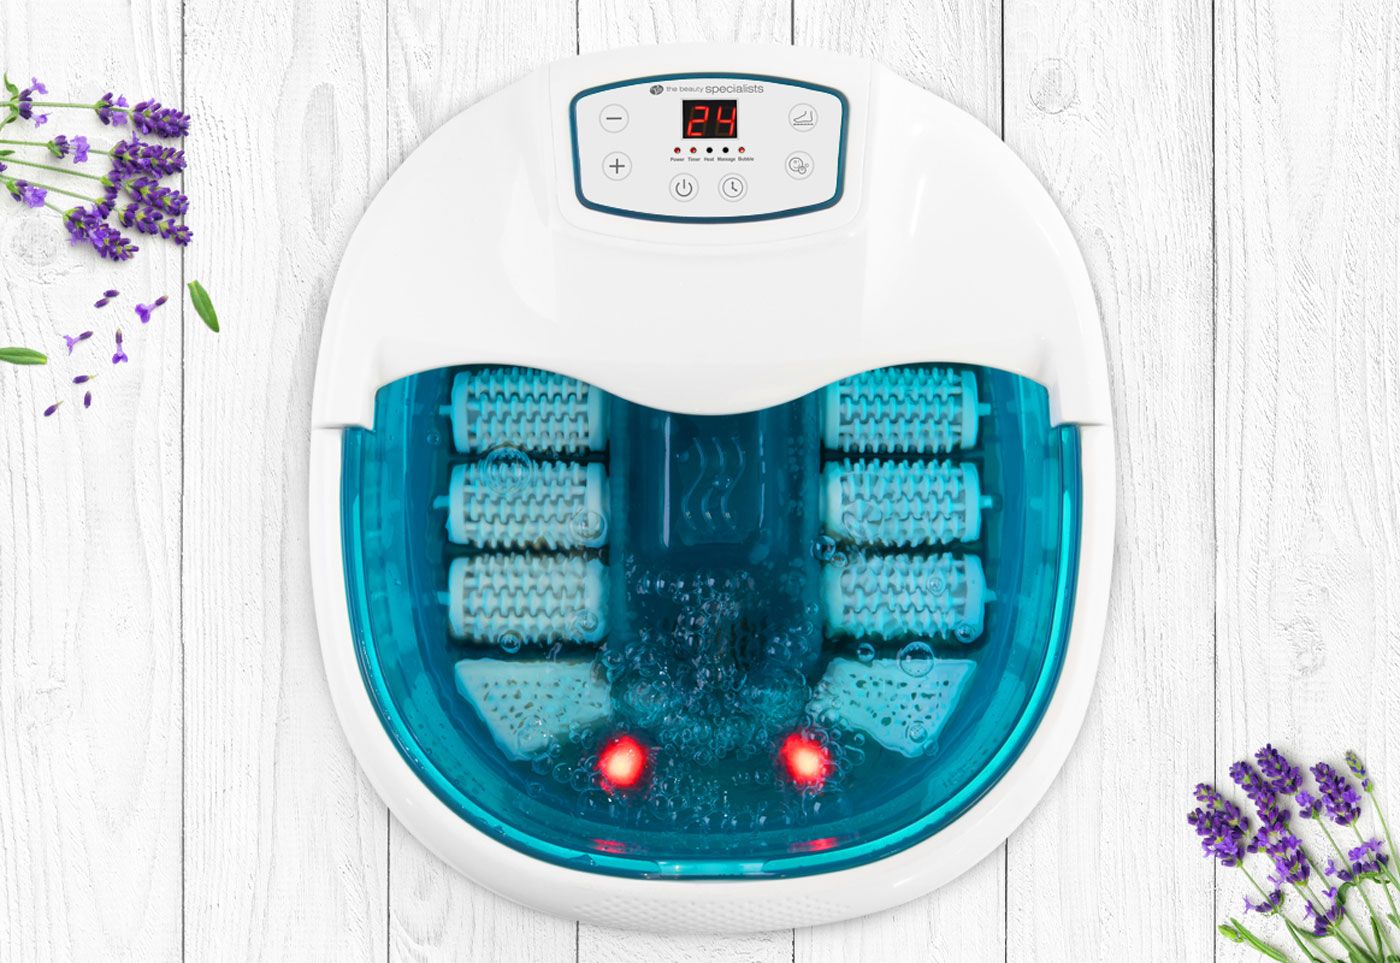 motorised roller foot spa bath filled with bubbling water placed on light wash wooden floor surrounded by lavender 